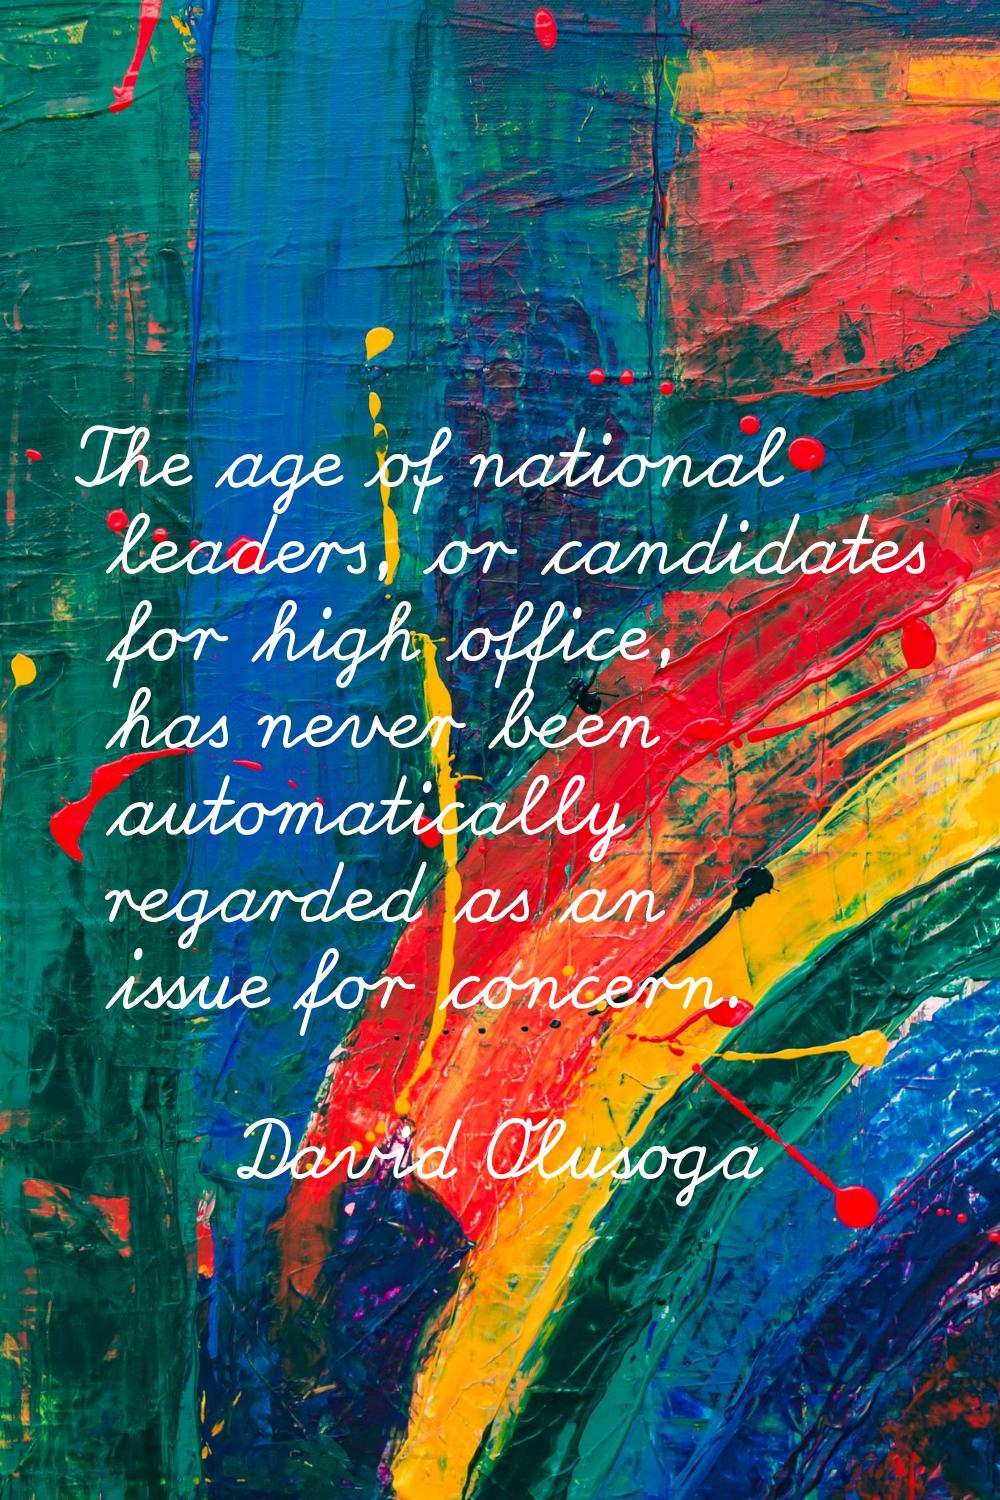 The age of national leaders, or candidates for high office, has never been automatically regarded a